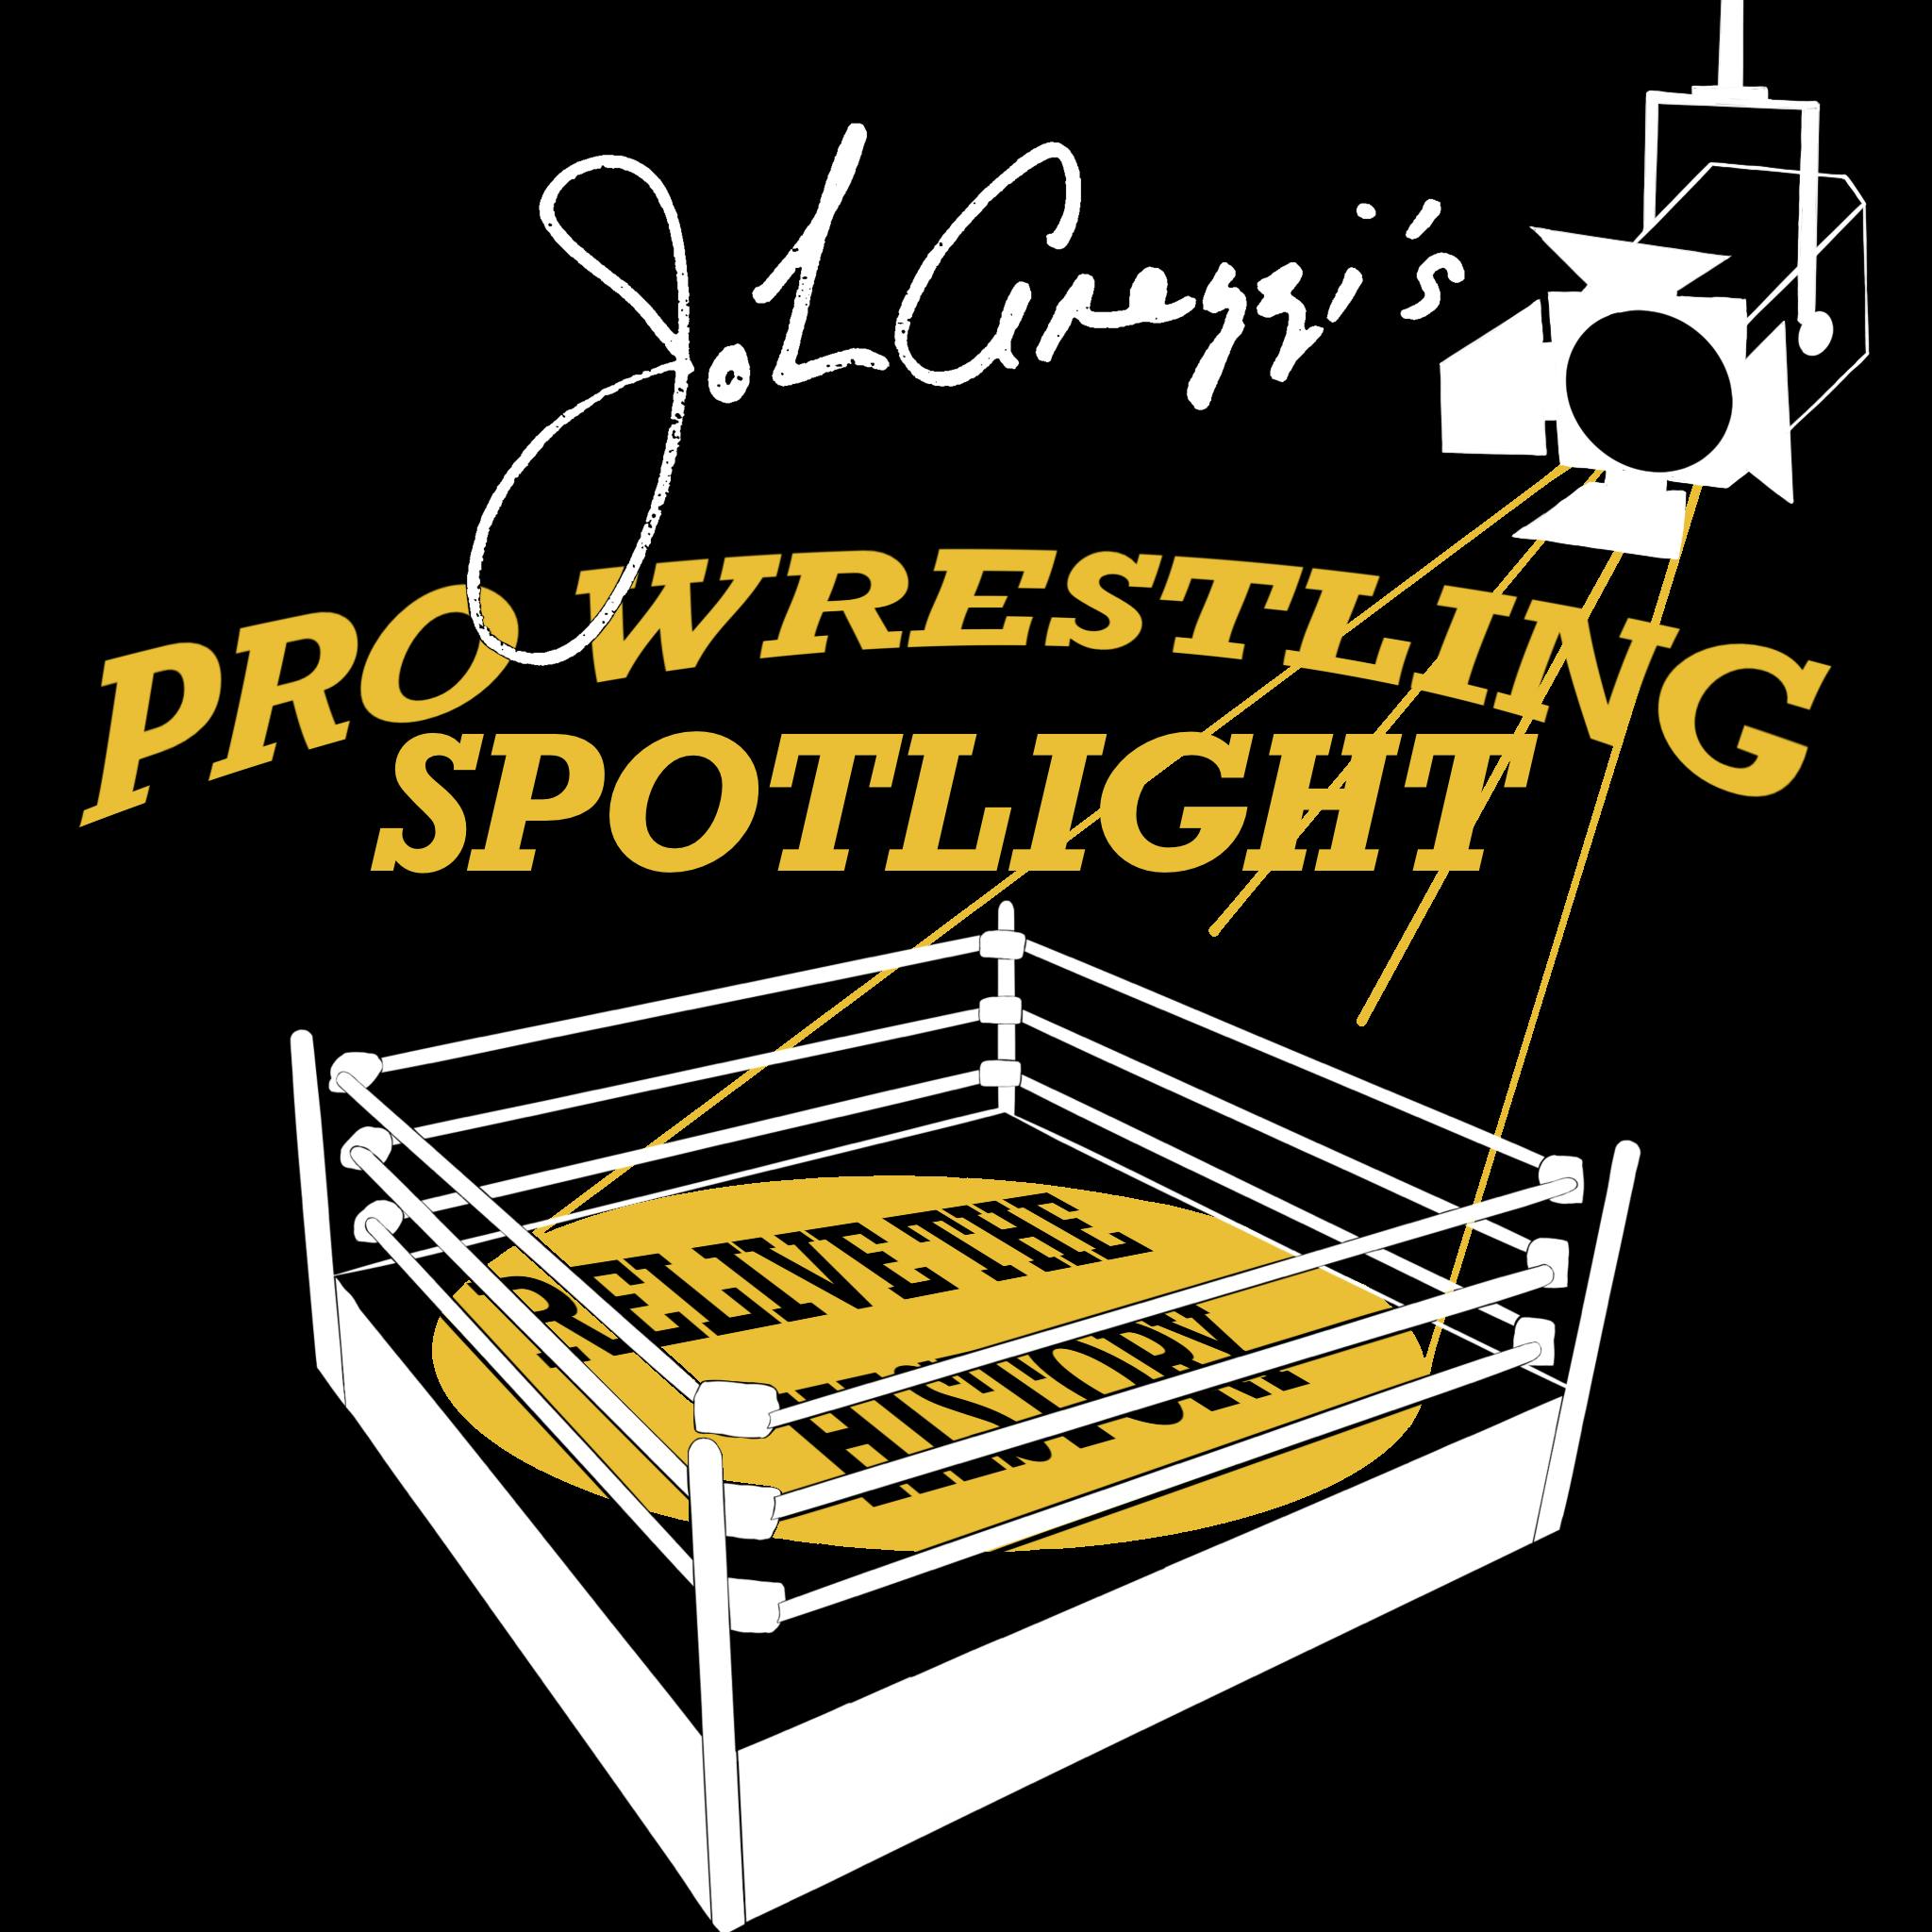 Episode 97 - Cactus Jack from 1994! Cactus leaves WCW, discusses Herb Abrams UWF Blackjack Brawl Fiasco, and ECW